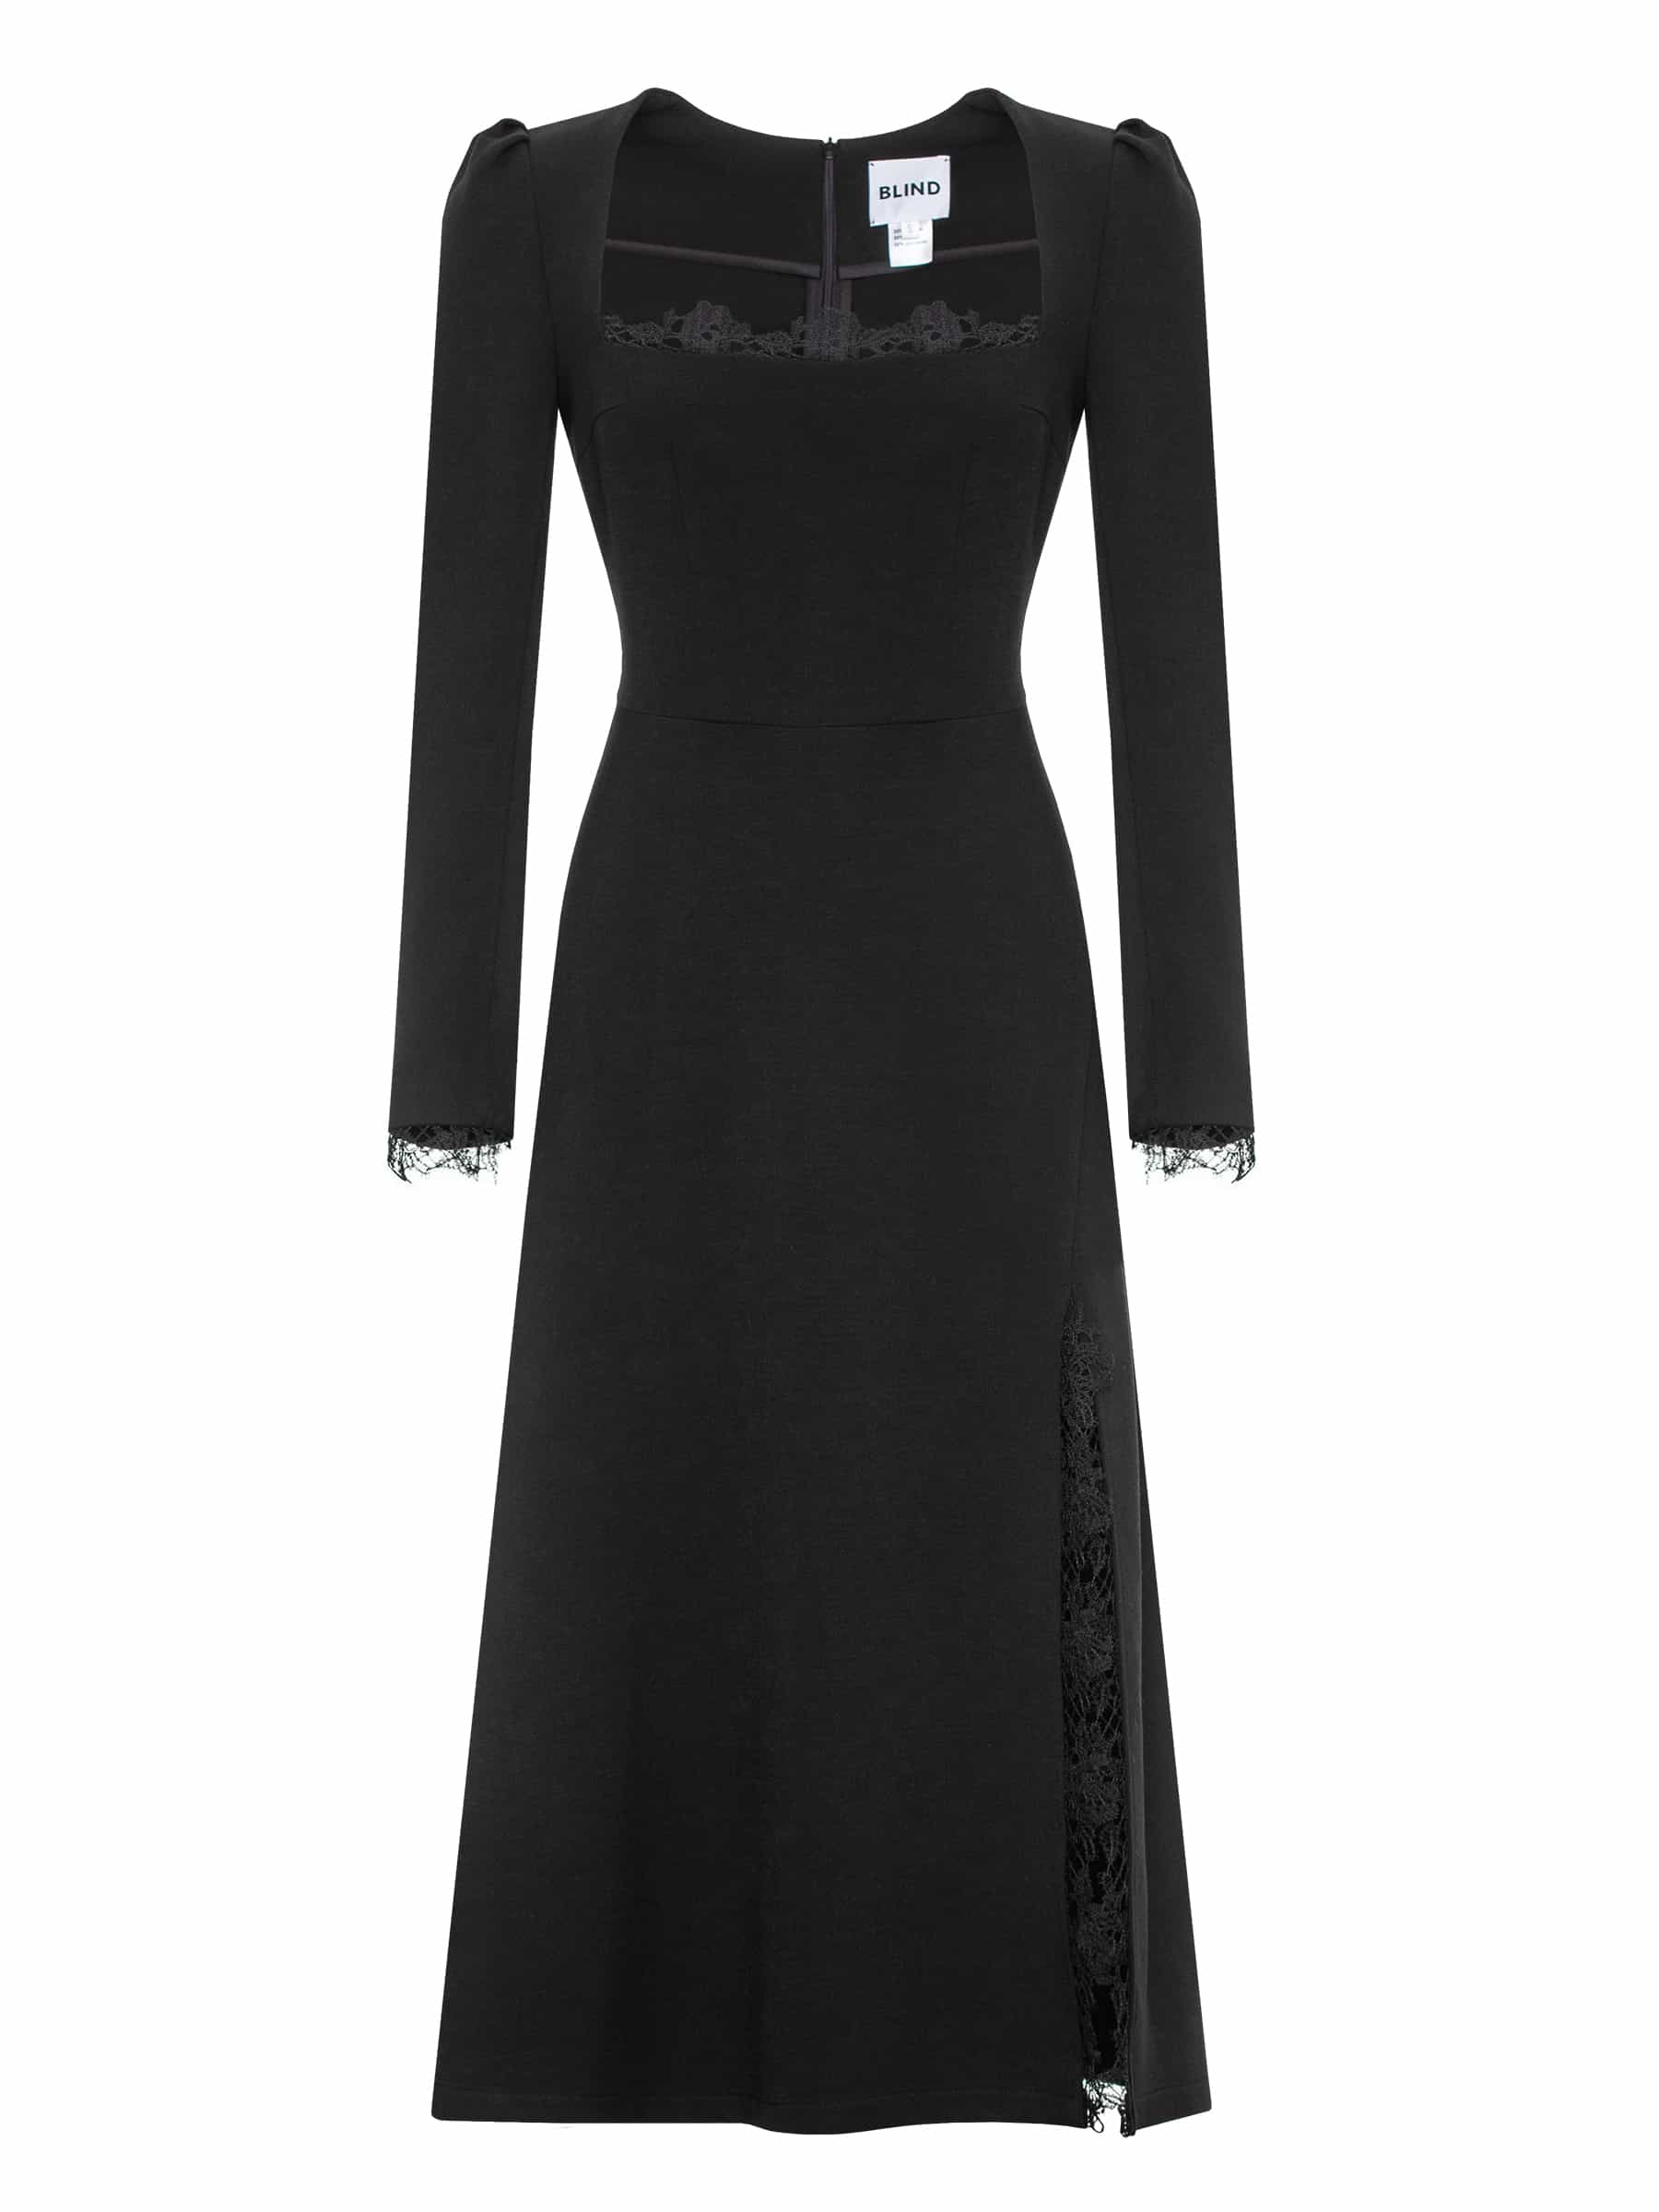 Dress with a square neckline and decorated with braided Spanish lace